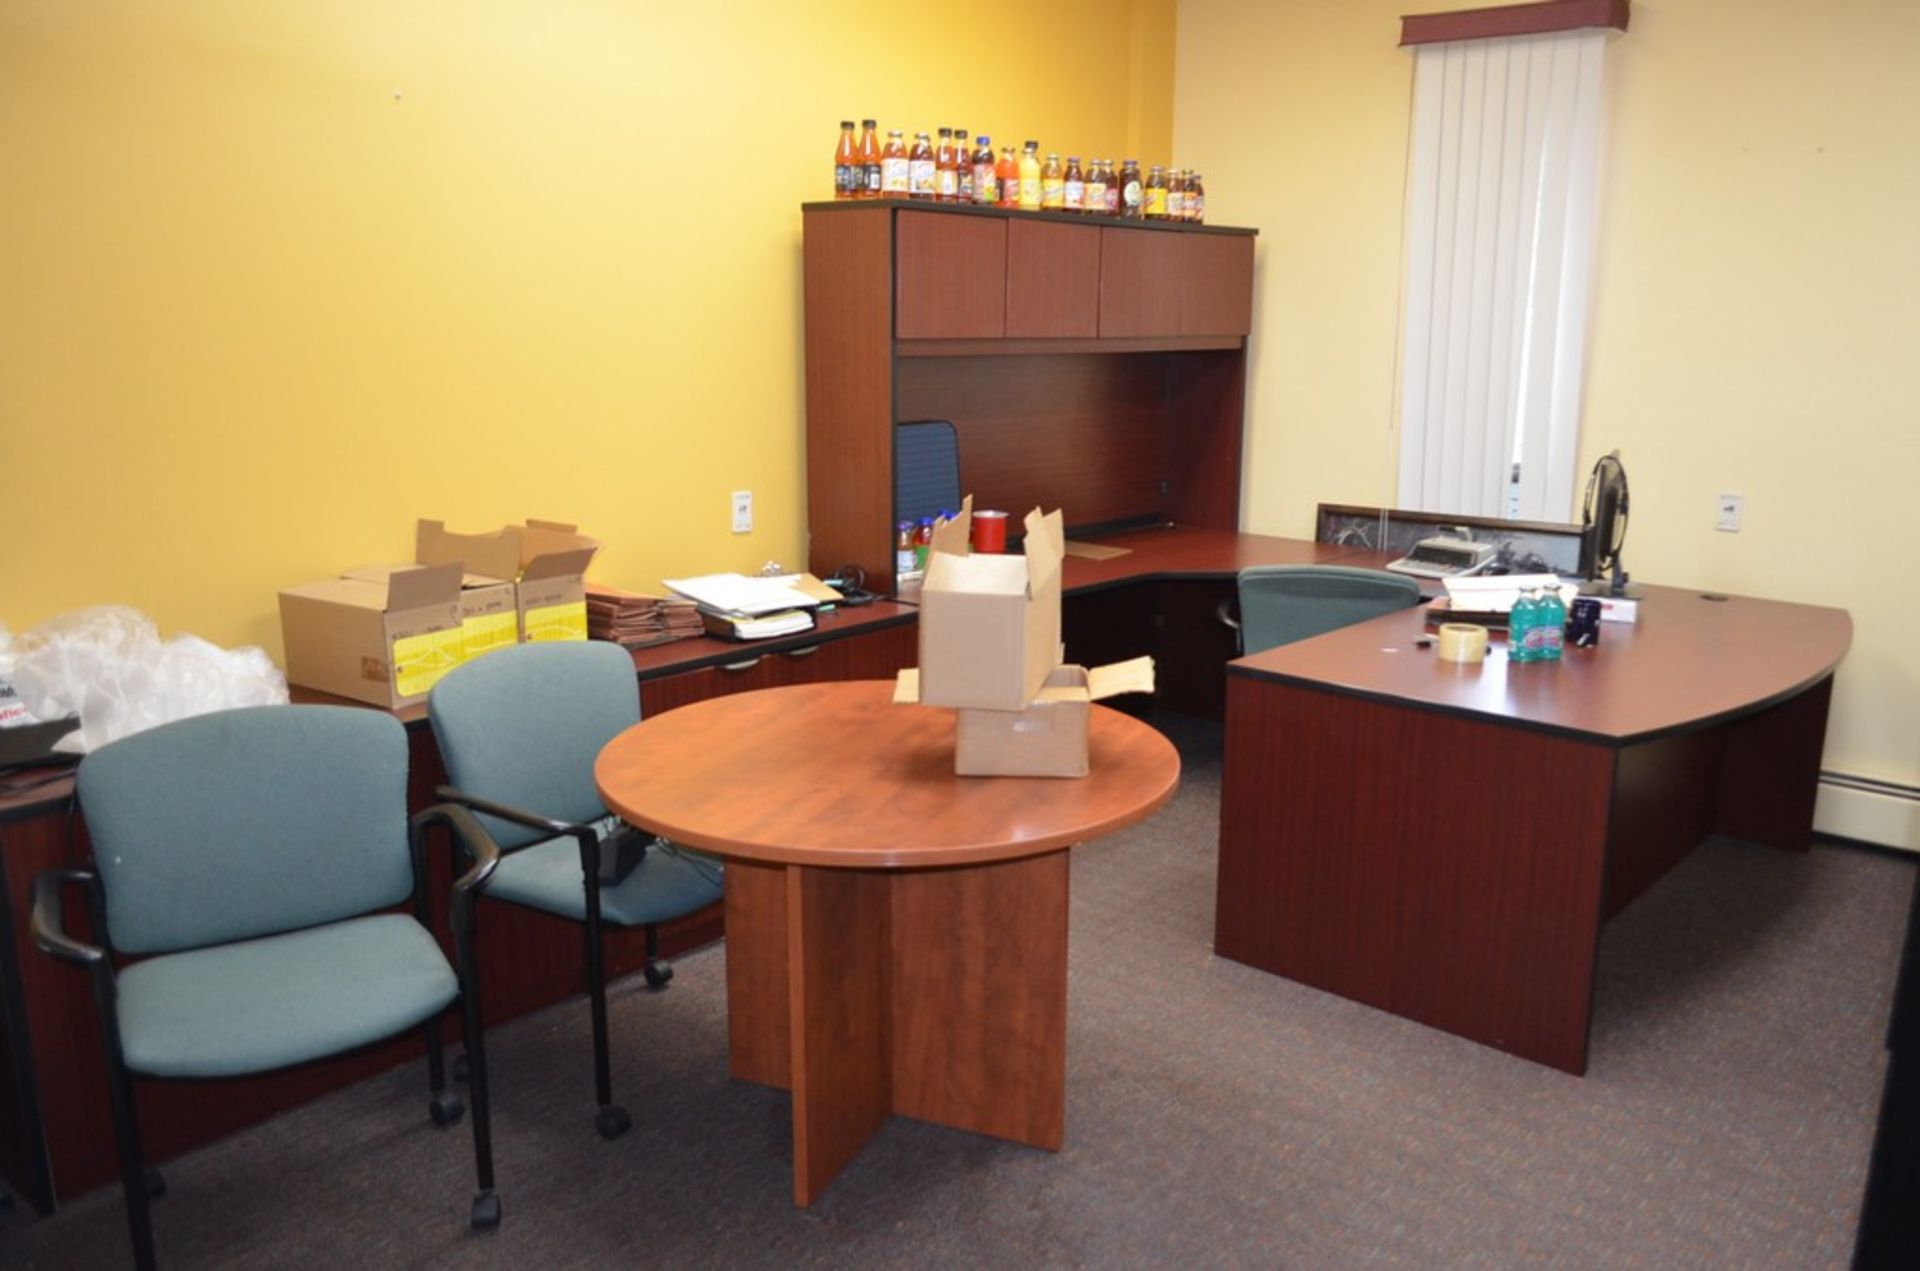 Lot - Furniture in (2) Offices (Printer not Included); Location in Plant: Main Office Area - Image 2 of 7